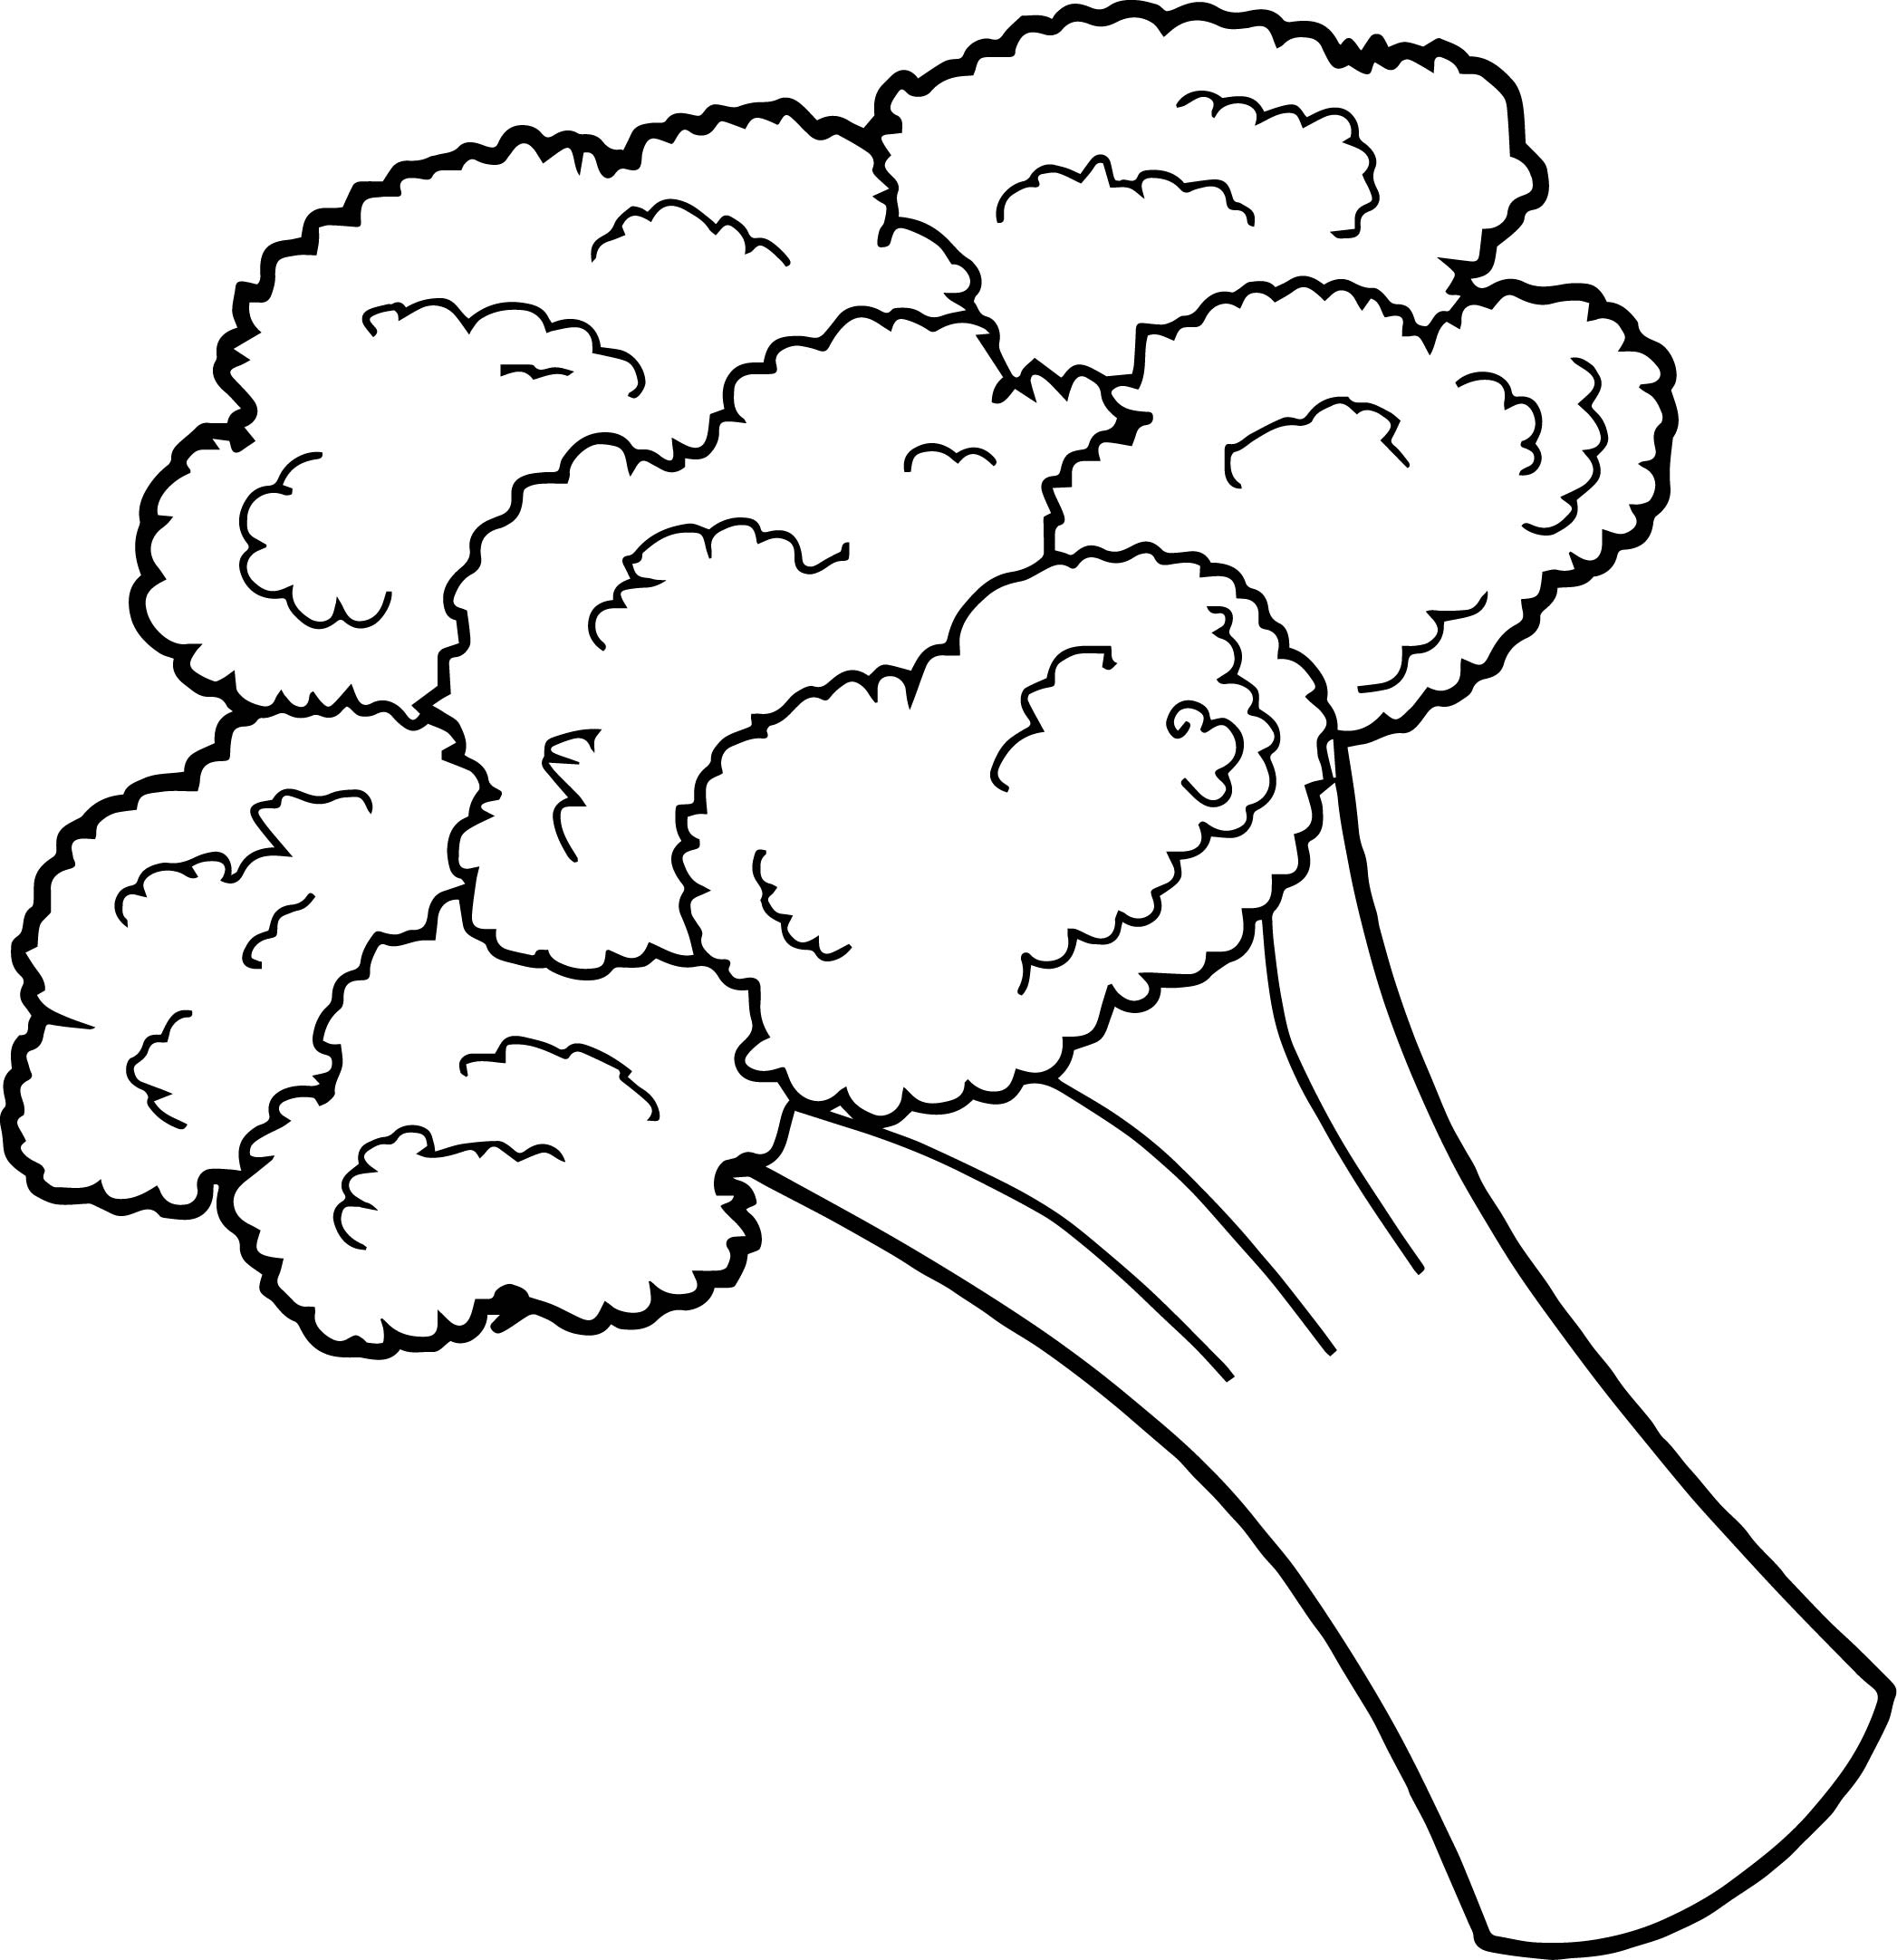 Broccoli Vegetables Coloring Page